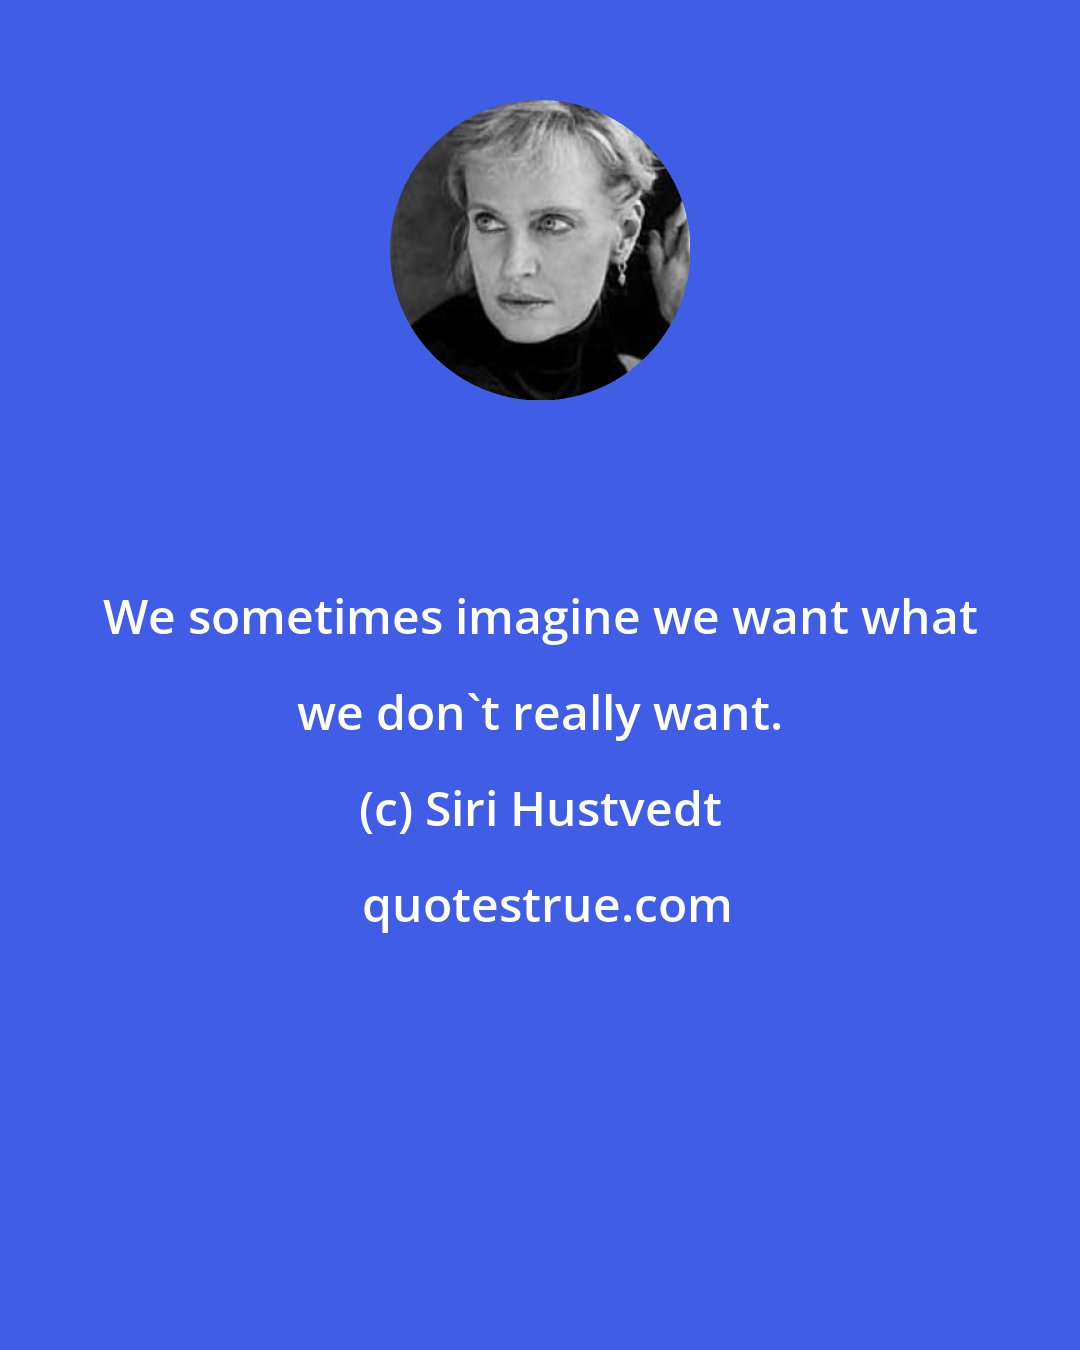 Siri Hustvedt: We sometimes imagine we want what we don't really want.